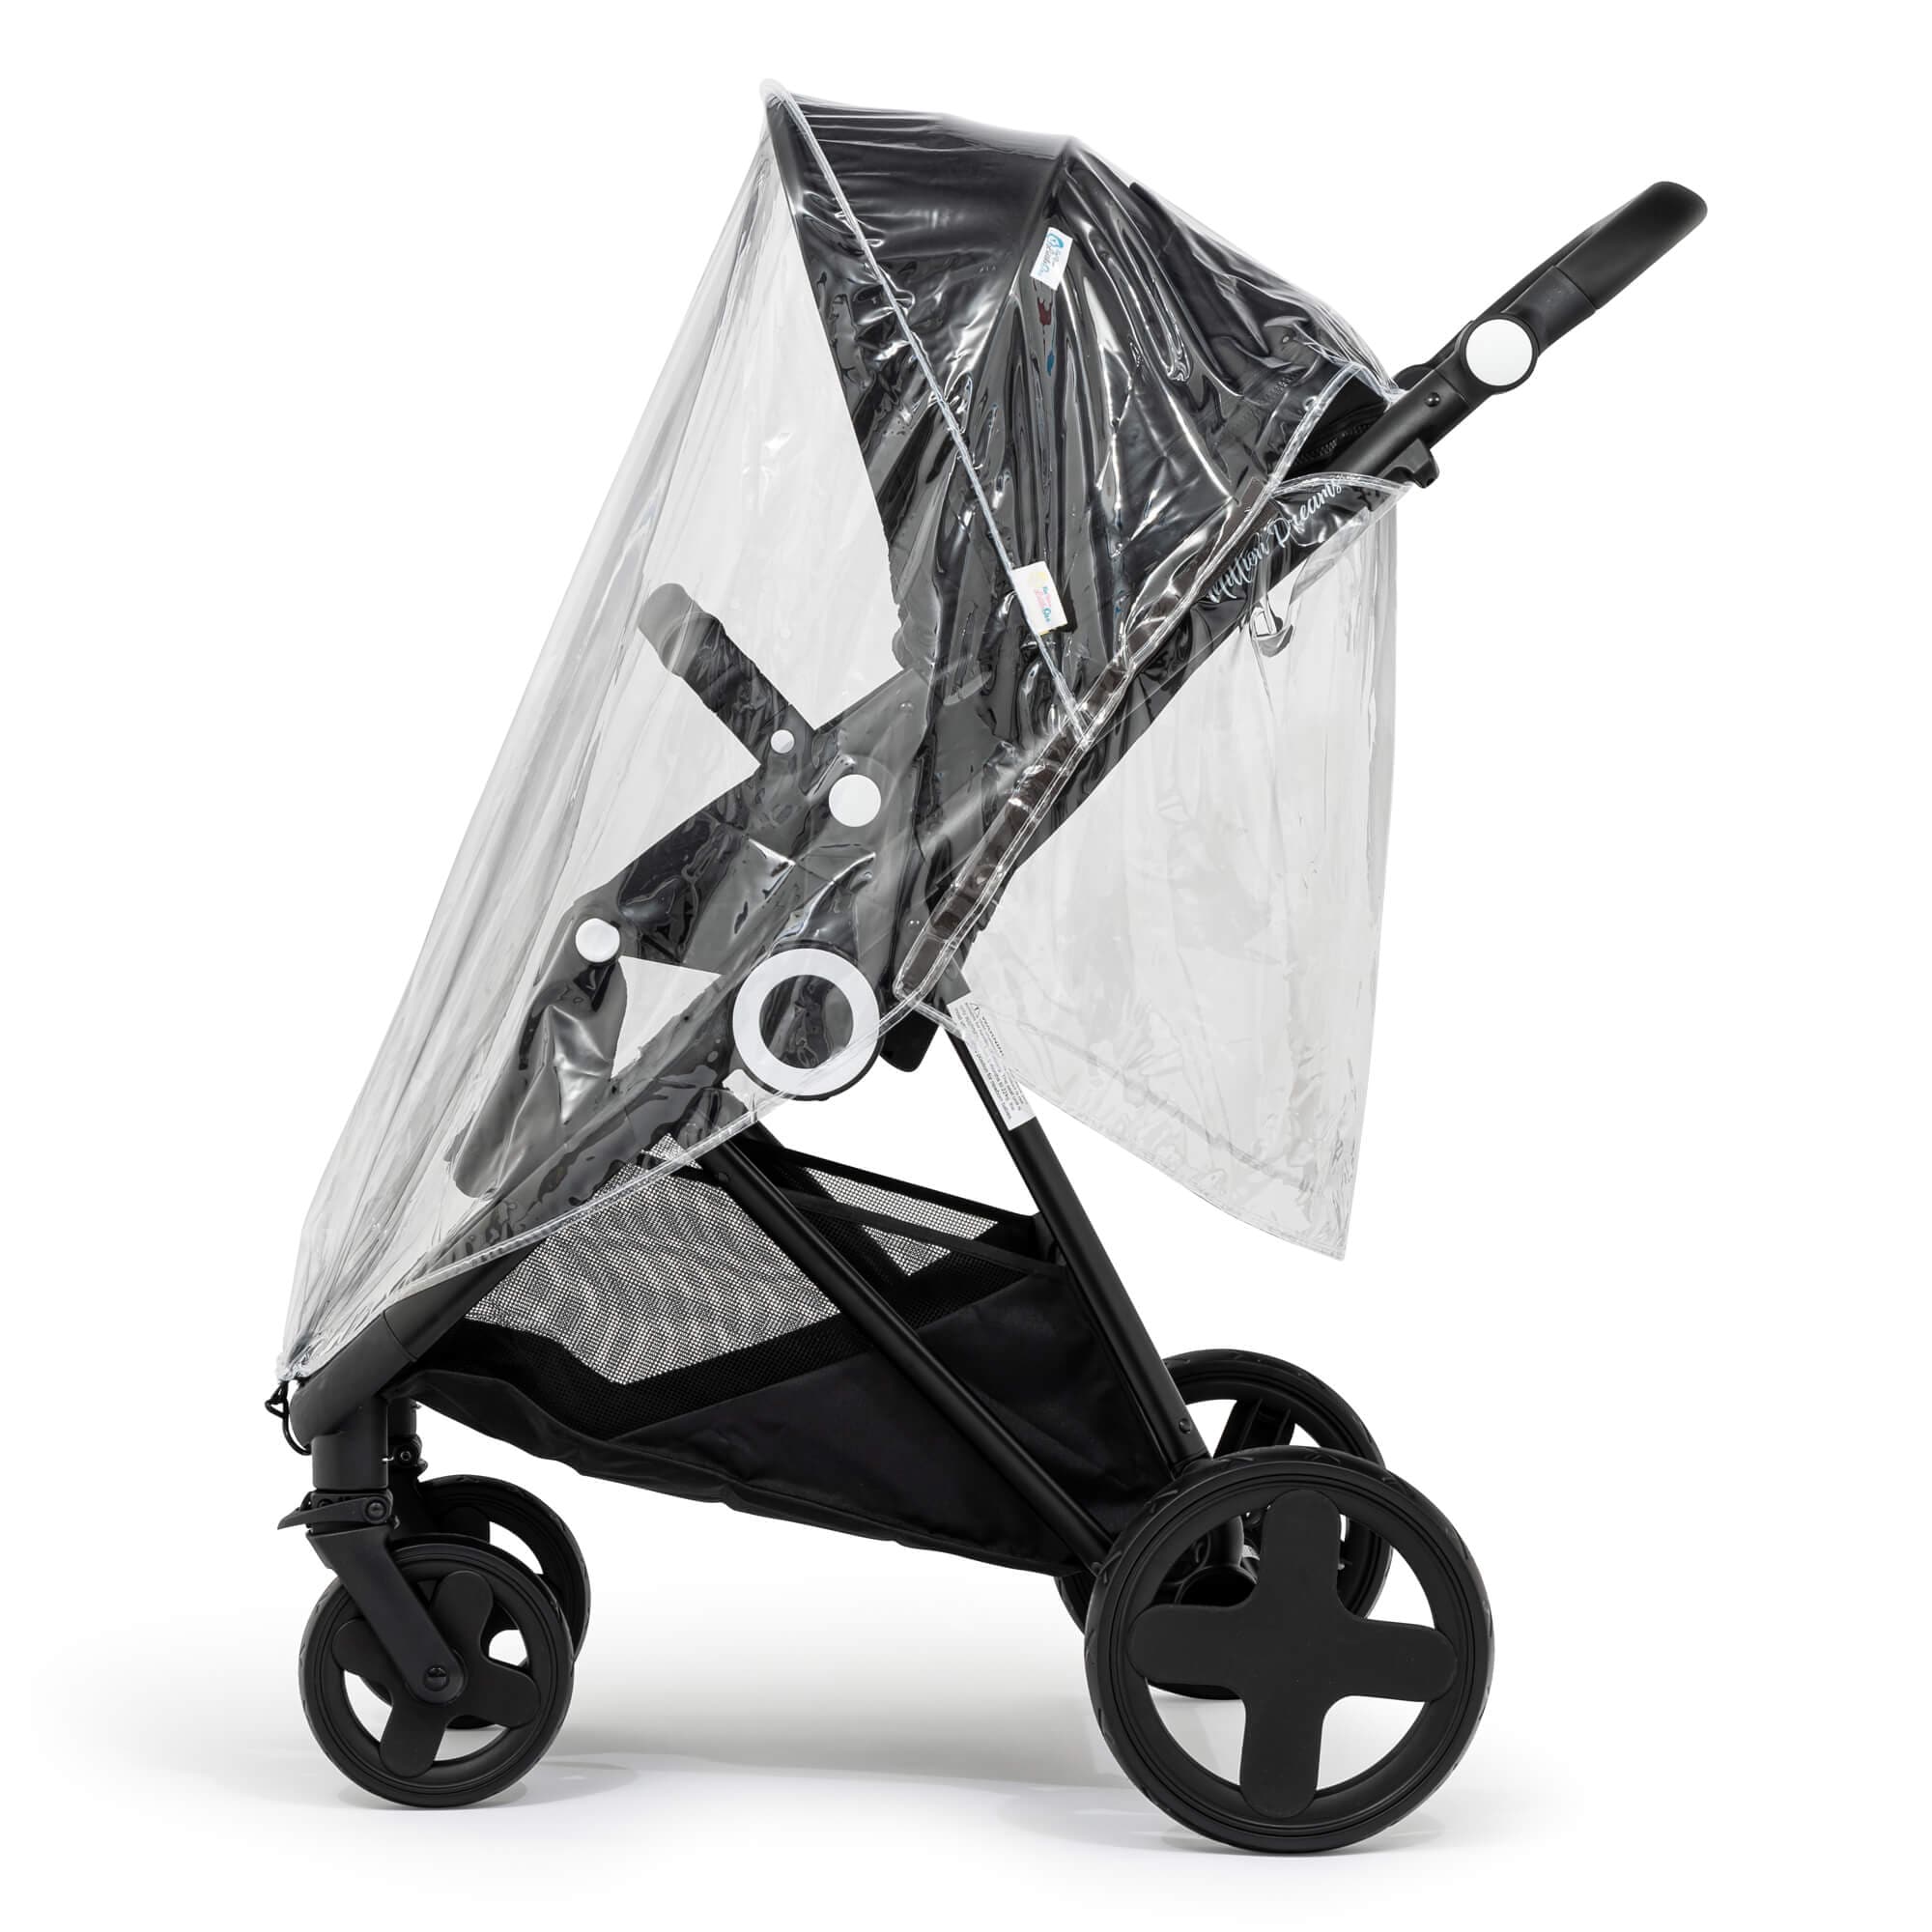 Universal Rain Cover For Pushchairs Strollers Buggys Prams - For Your Little One